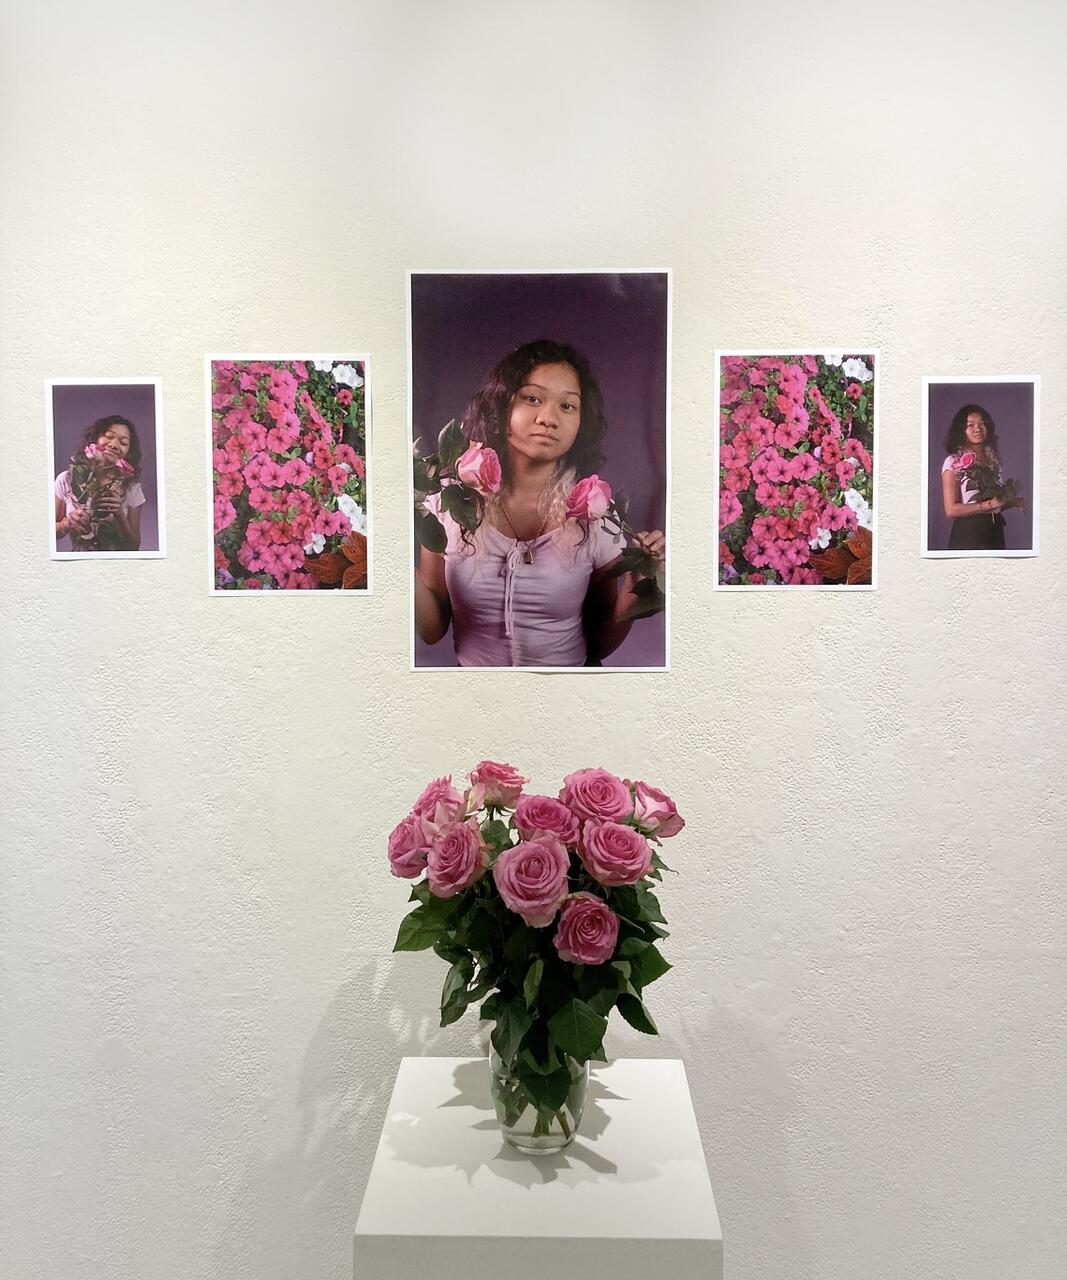 5 color photographs shown behind a bouquet of pink roses in a glass vase. The central image is the largest and shows the student looking directly into the camera holding two of the roses. Two images of different pink flowers can be seen to either side. Then, on the outsides are two more images of the student holding the roses in different poses.